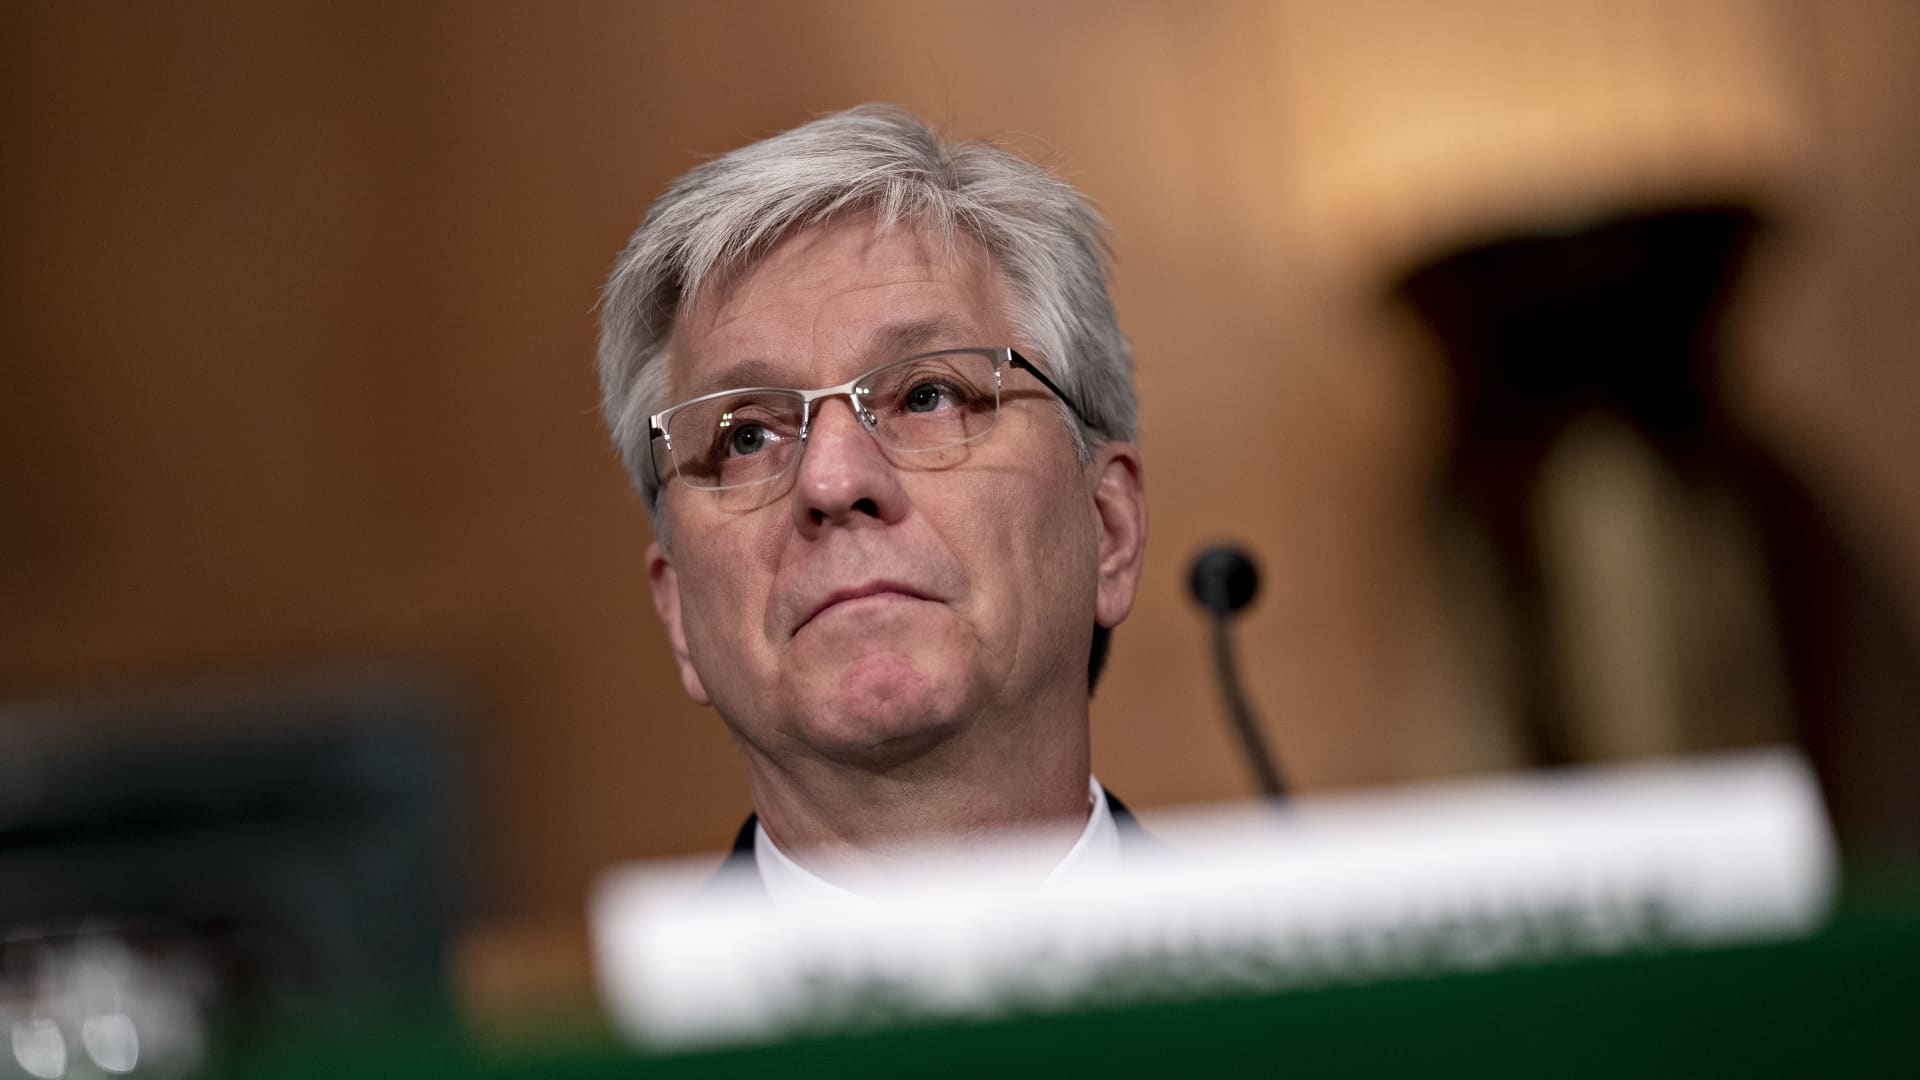 Christopher Waller, U.S. President Donald Trump's nominee for governor of the Federal Reserve, listens during a Senate Banking Committee confirmation hearing in Washington, D.C., on Thursday, Feb. 13, 2020.